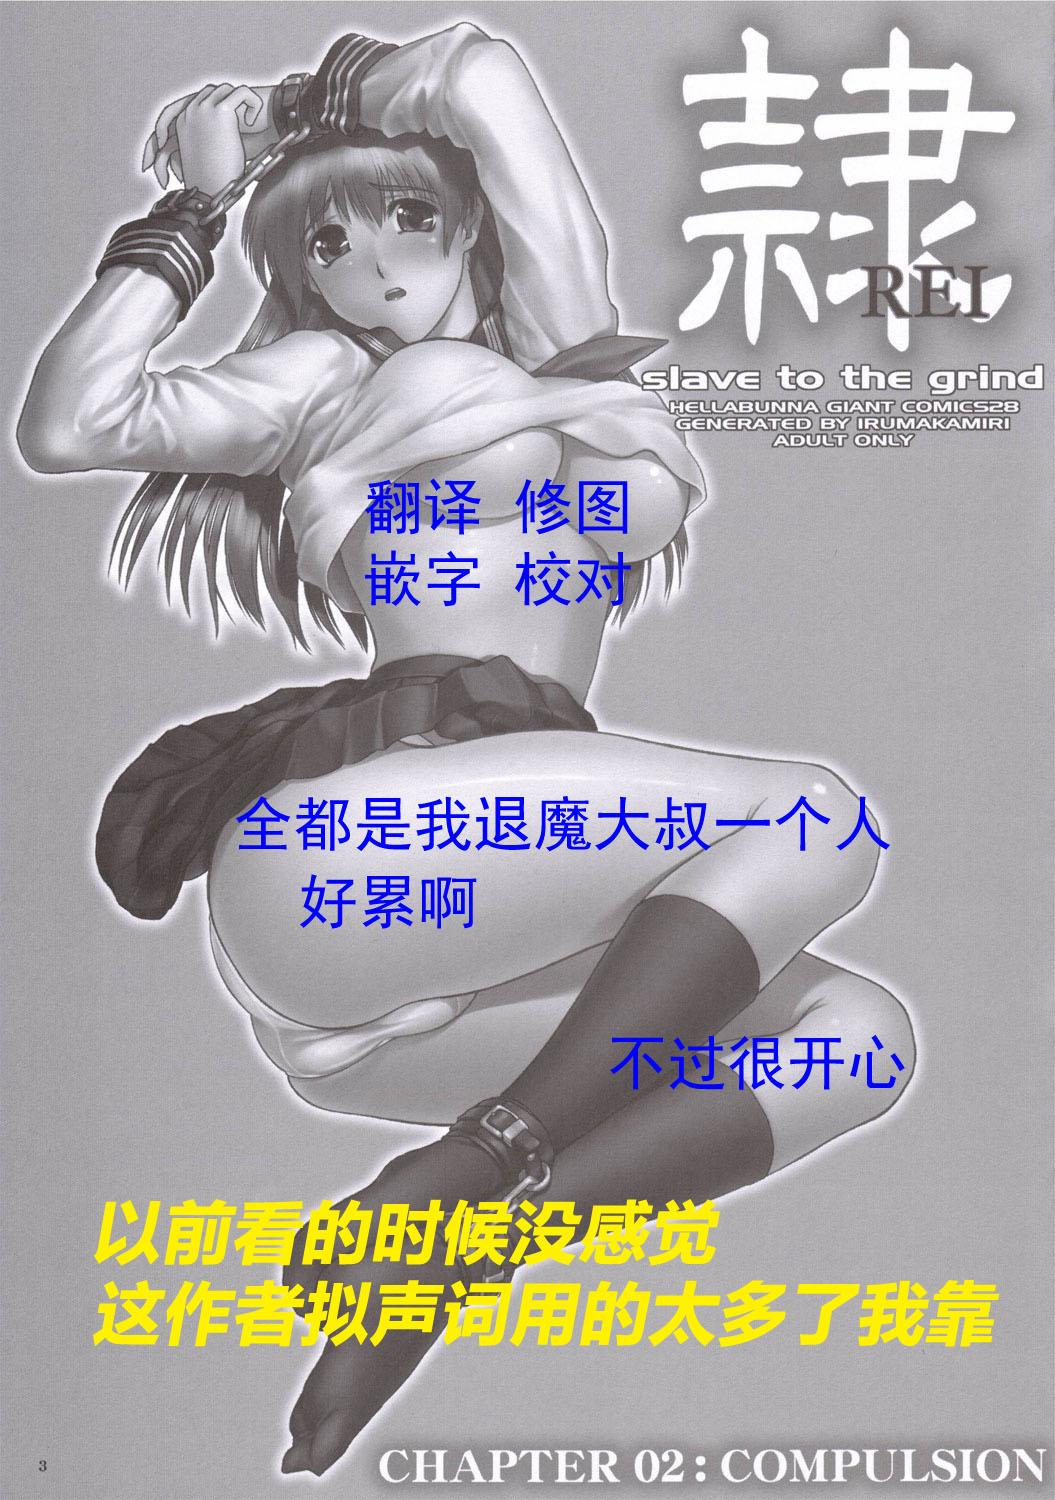 Wife (C69) [Hellabunna (Iruma Kamiri)] REI - slave to the grind - CHAPTER 02: COMPULSION (Dead or Alive) [Chinese] [退魔大叔个人汉化] - Dead or alive Russia - Page 3